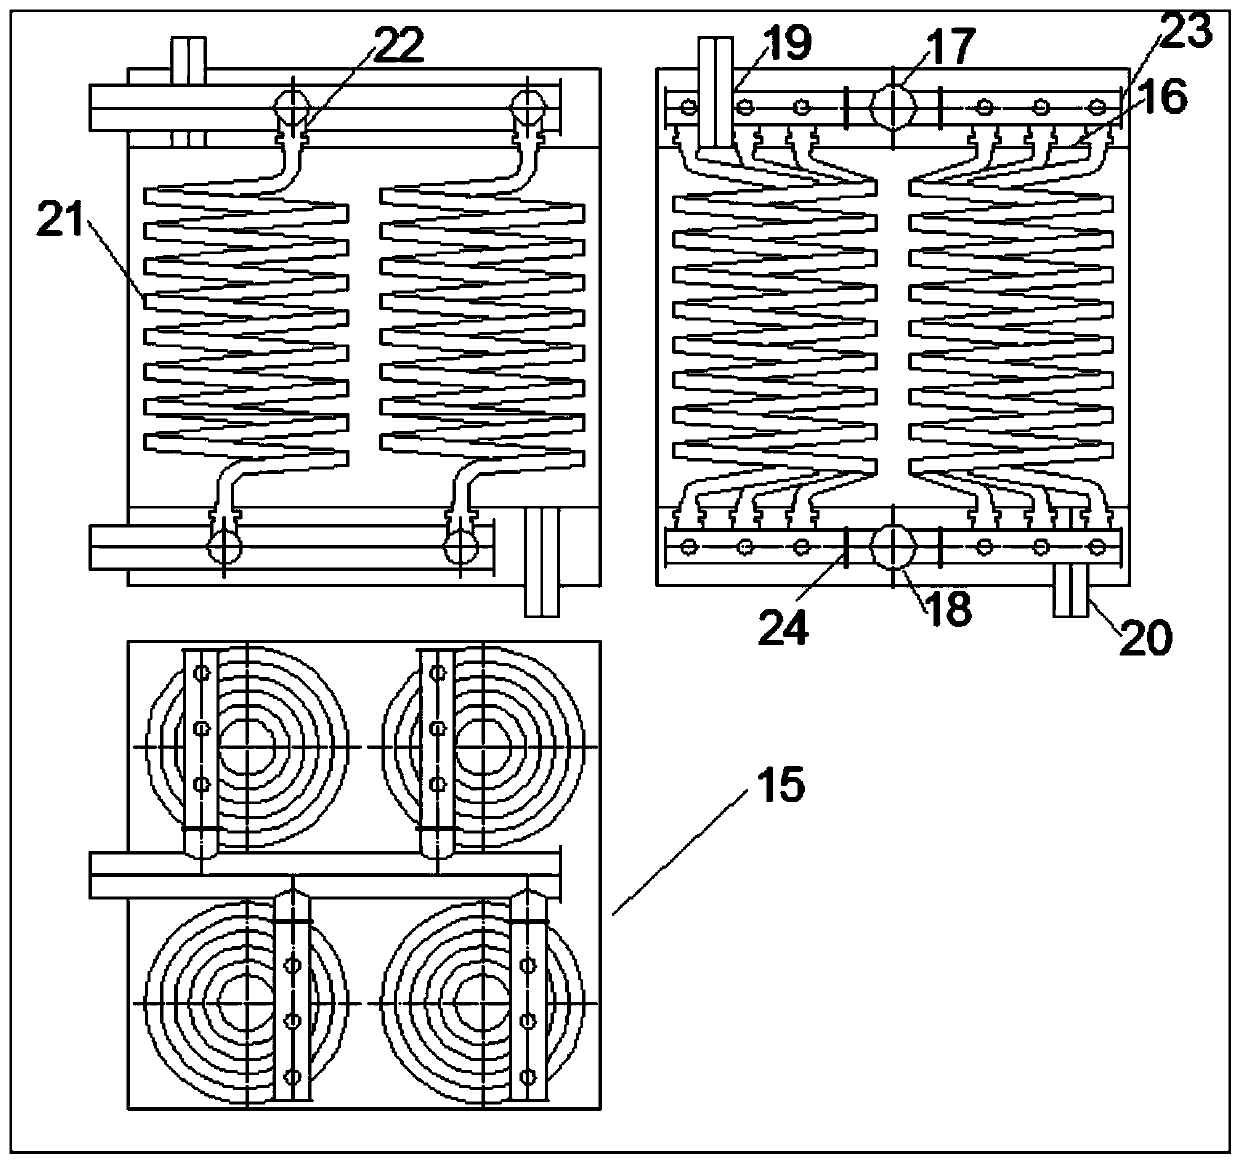 Heat exchanger and deep well heat exchange system thereof